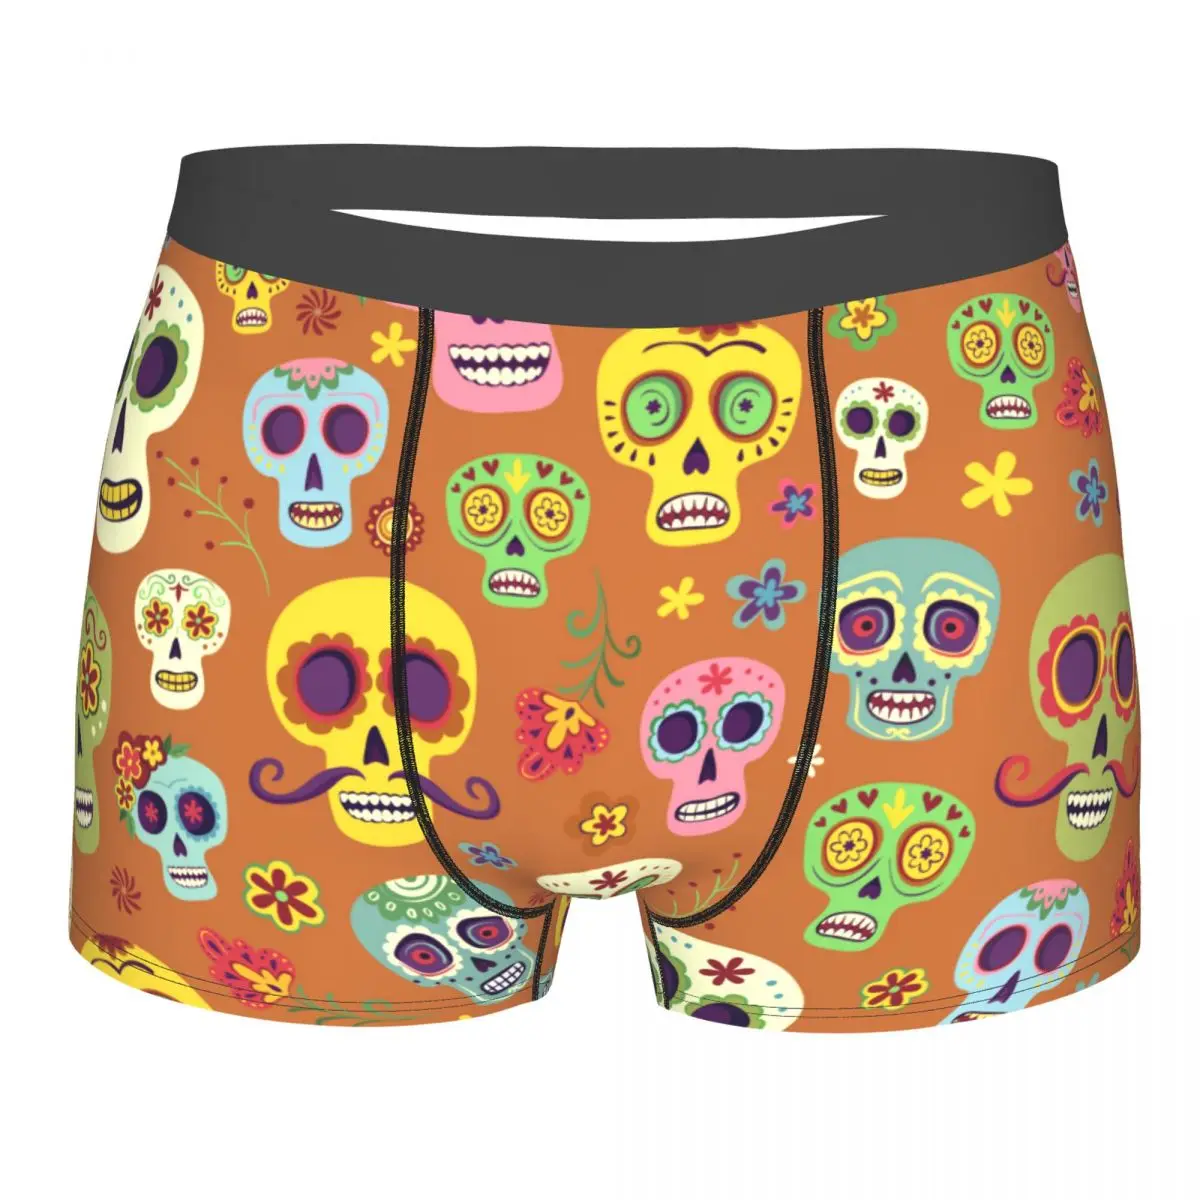 Men's Panties Underpants Boxers Underwear Mexican Sugar Skulls The Day Of The Dead Sexy Male Shorts